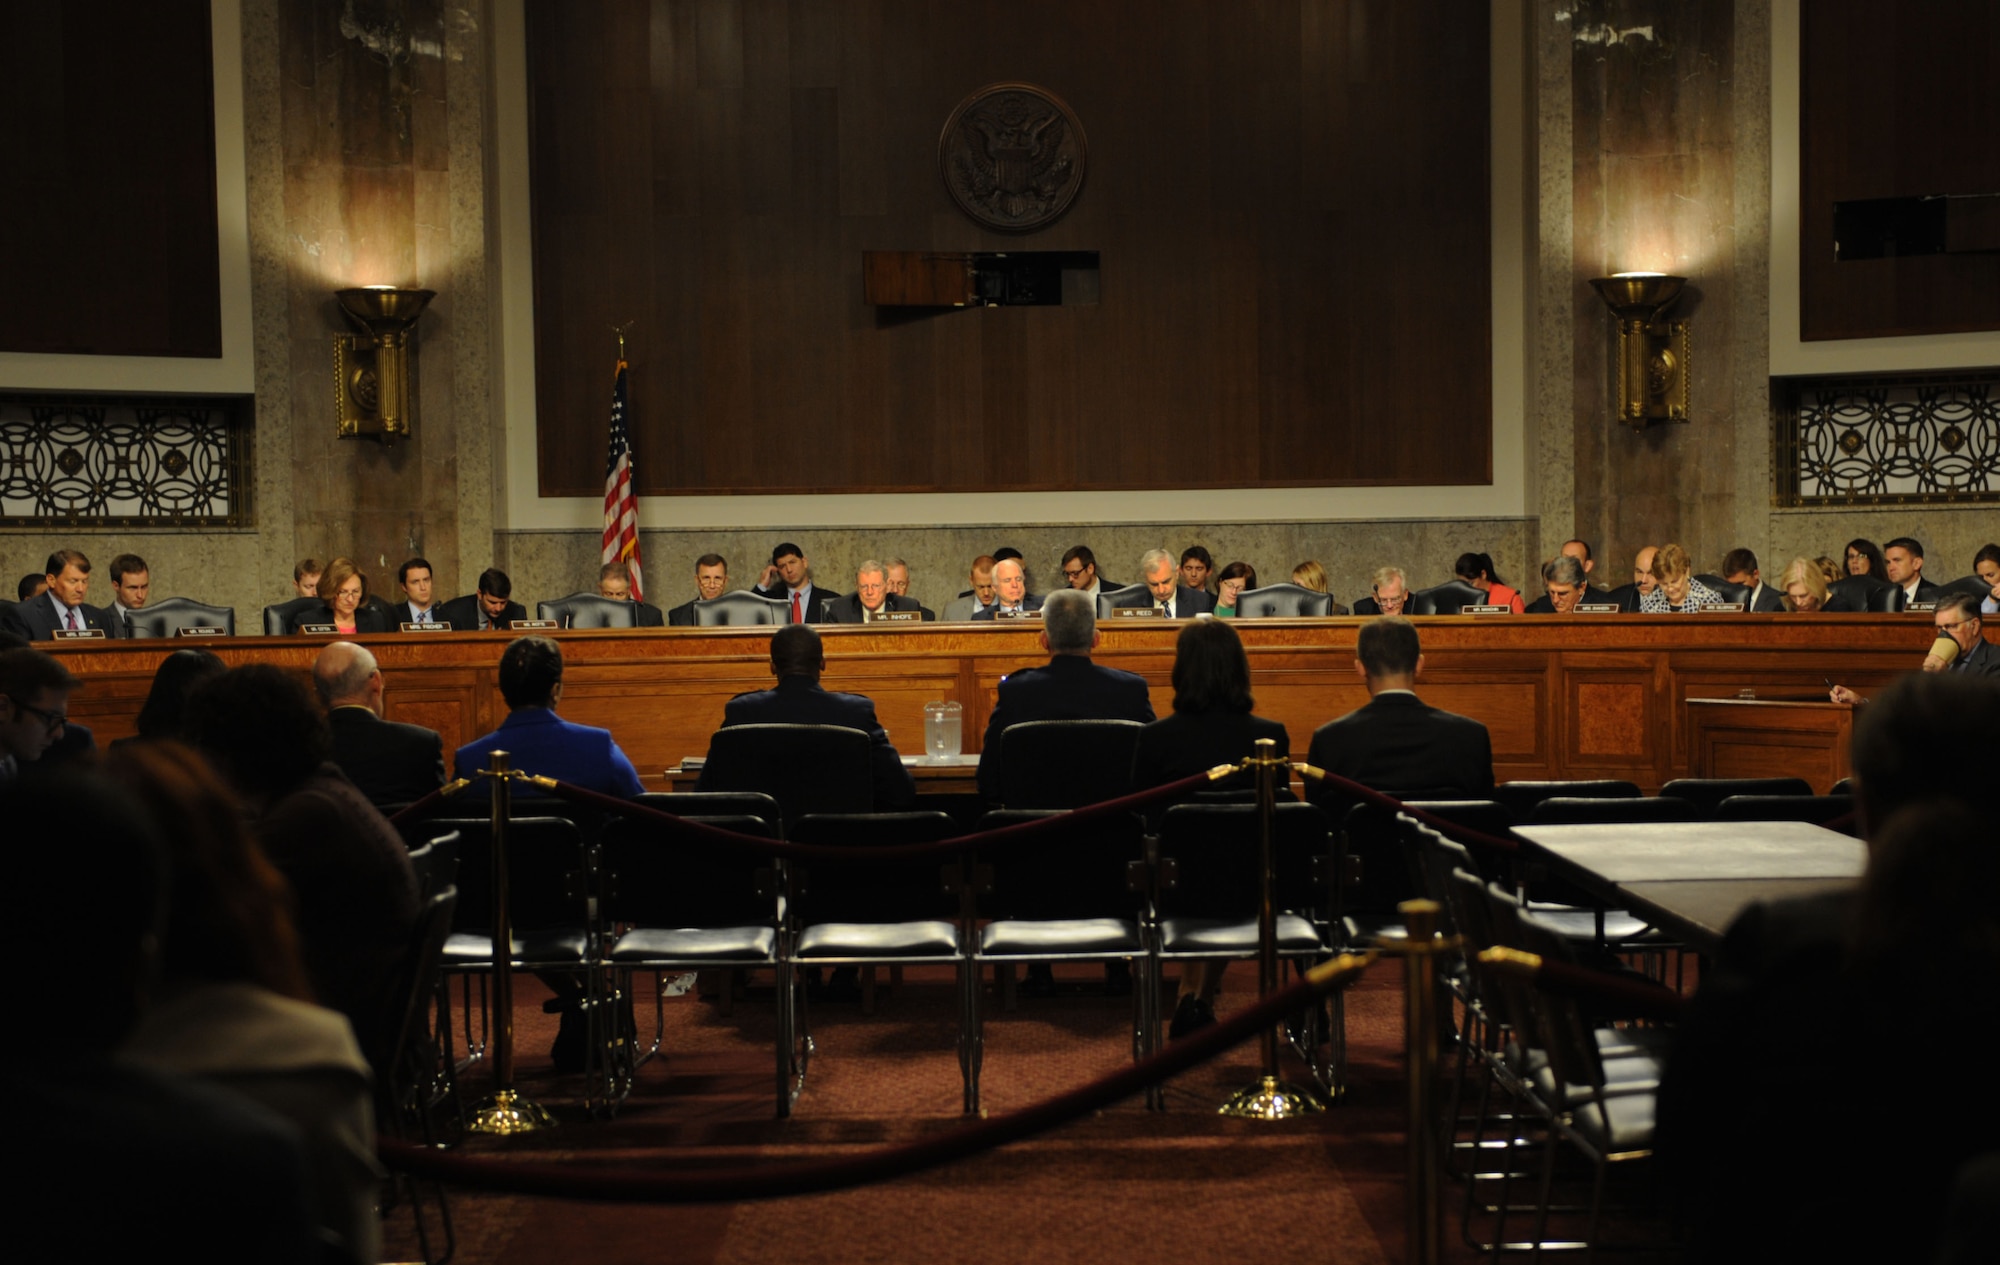 Gen. Paul J. Selva, the nominee for vice chairman for the Joint Chiefs of Staff, and Gen. Darren W. McDew, the nominee for U.S. Transportation Command commander, sit before Congress to testify for their future positions during their nomination hearing July 14, 2015. During the course of the hearing, the generals testified of threats to the U.S. Issues such as suicide, readiness, sequestration and mental health were also brought up during the hearing. (U.S. Air Force photo/Senior Airman Hailey Haux)